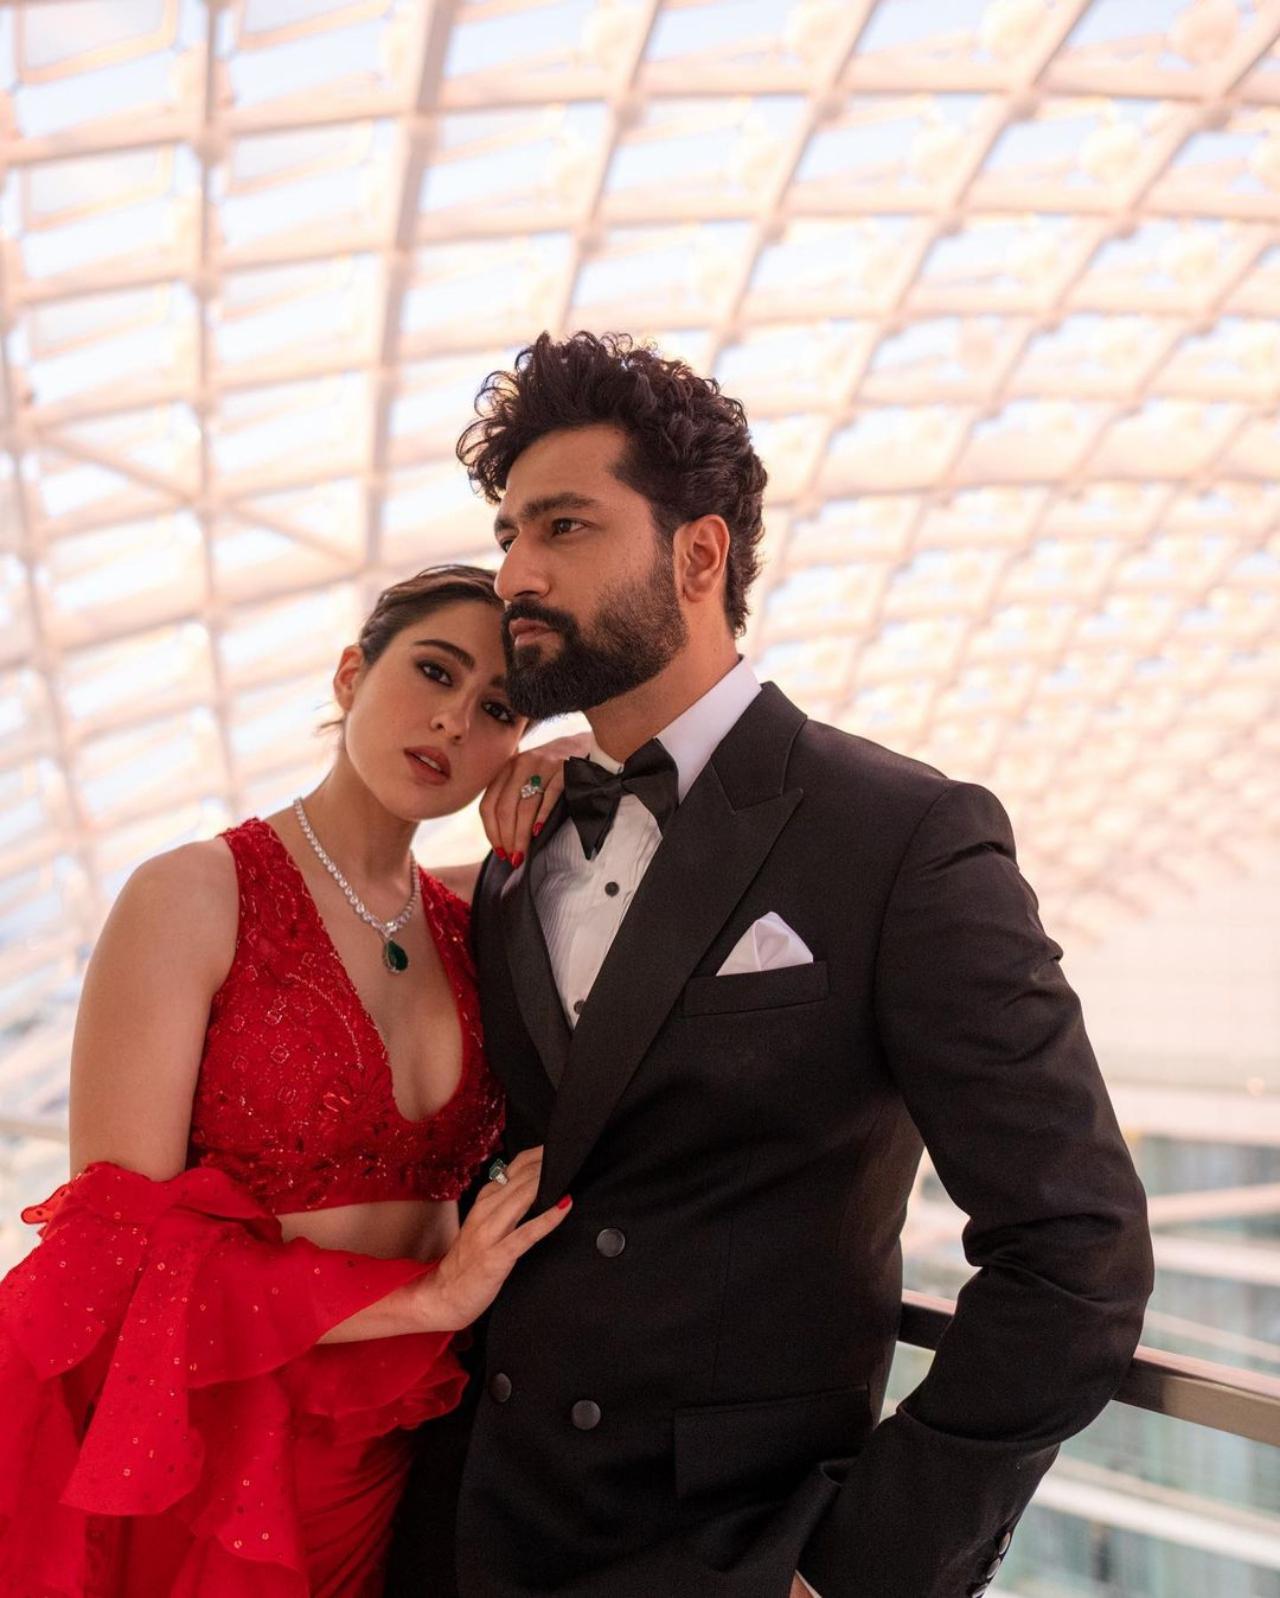 While Sara painted the green carpet of IIFA red in her ravishing red ruffled saree, Vicky looked dashing in his classic black tuxedo. The two raised the mercury levels of the night as they posed together for some sizzling pictures.